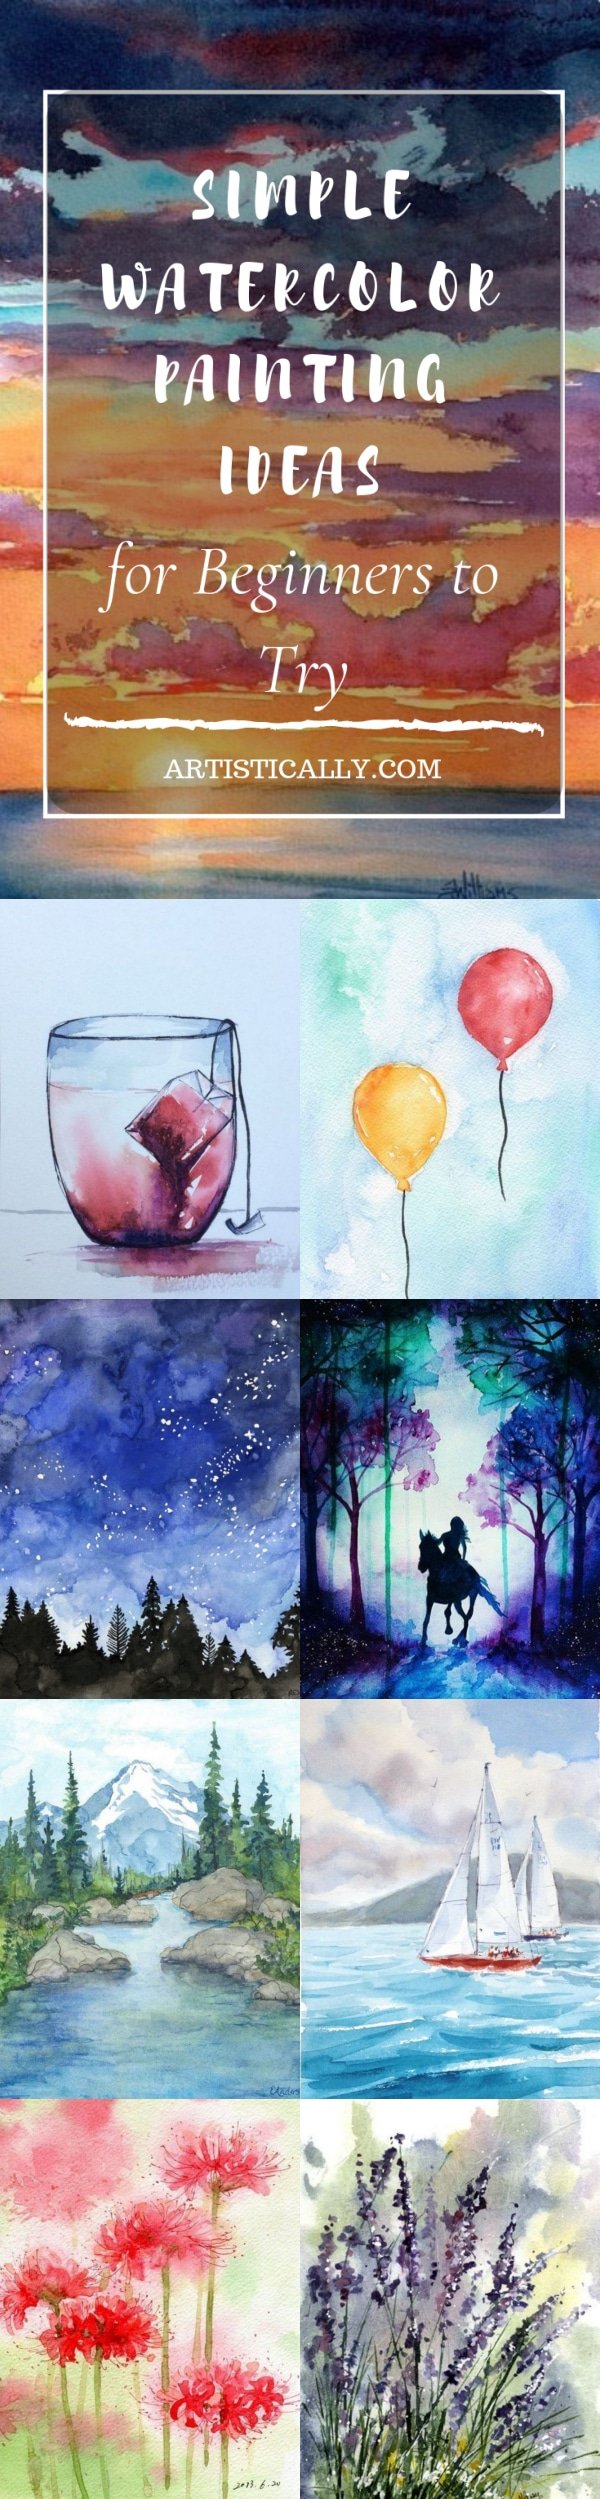  Simple-Watercolor-Painting-Ideas-for-Beginners-to-Try